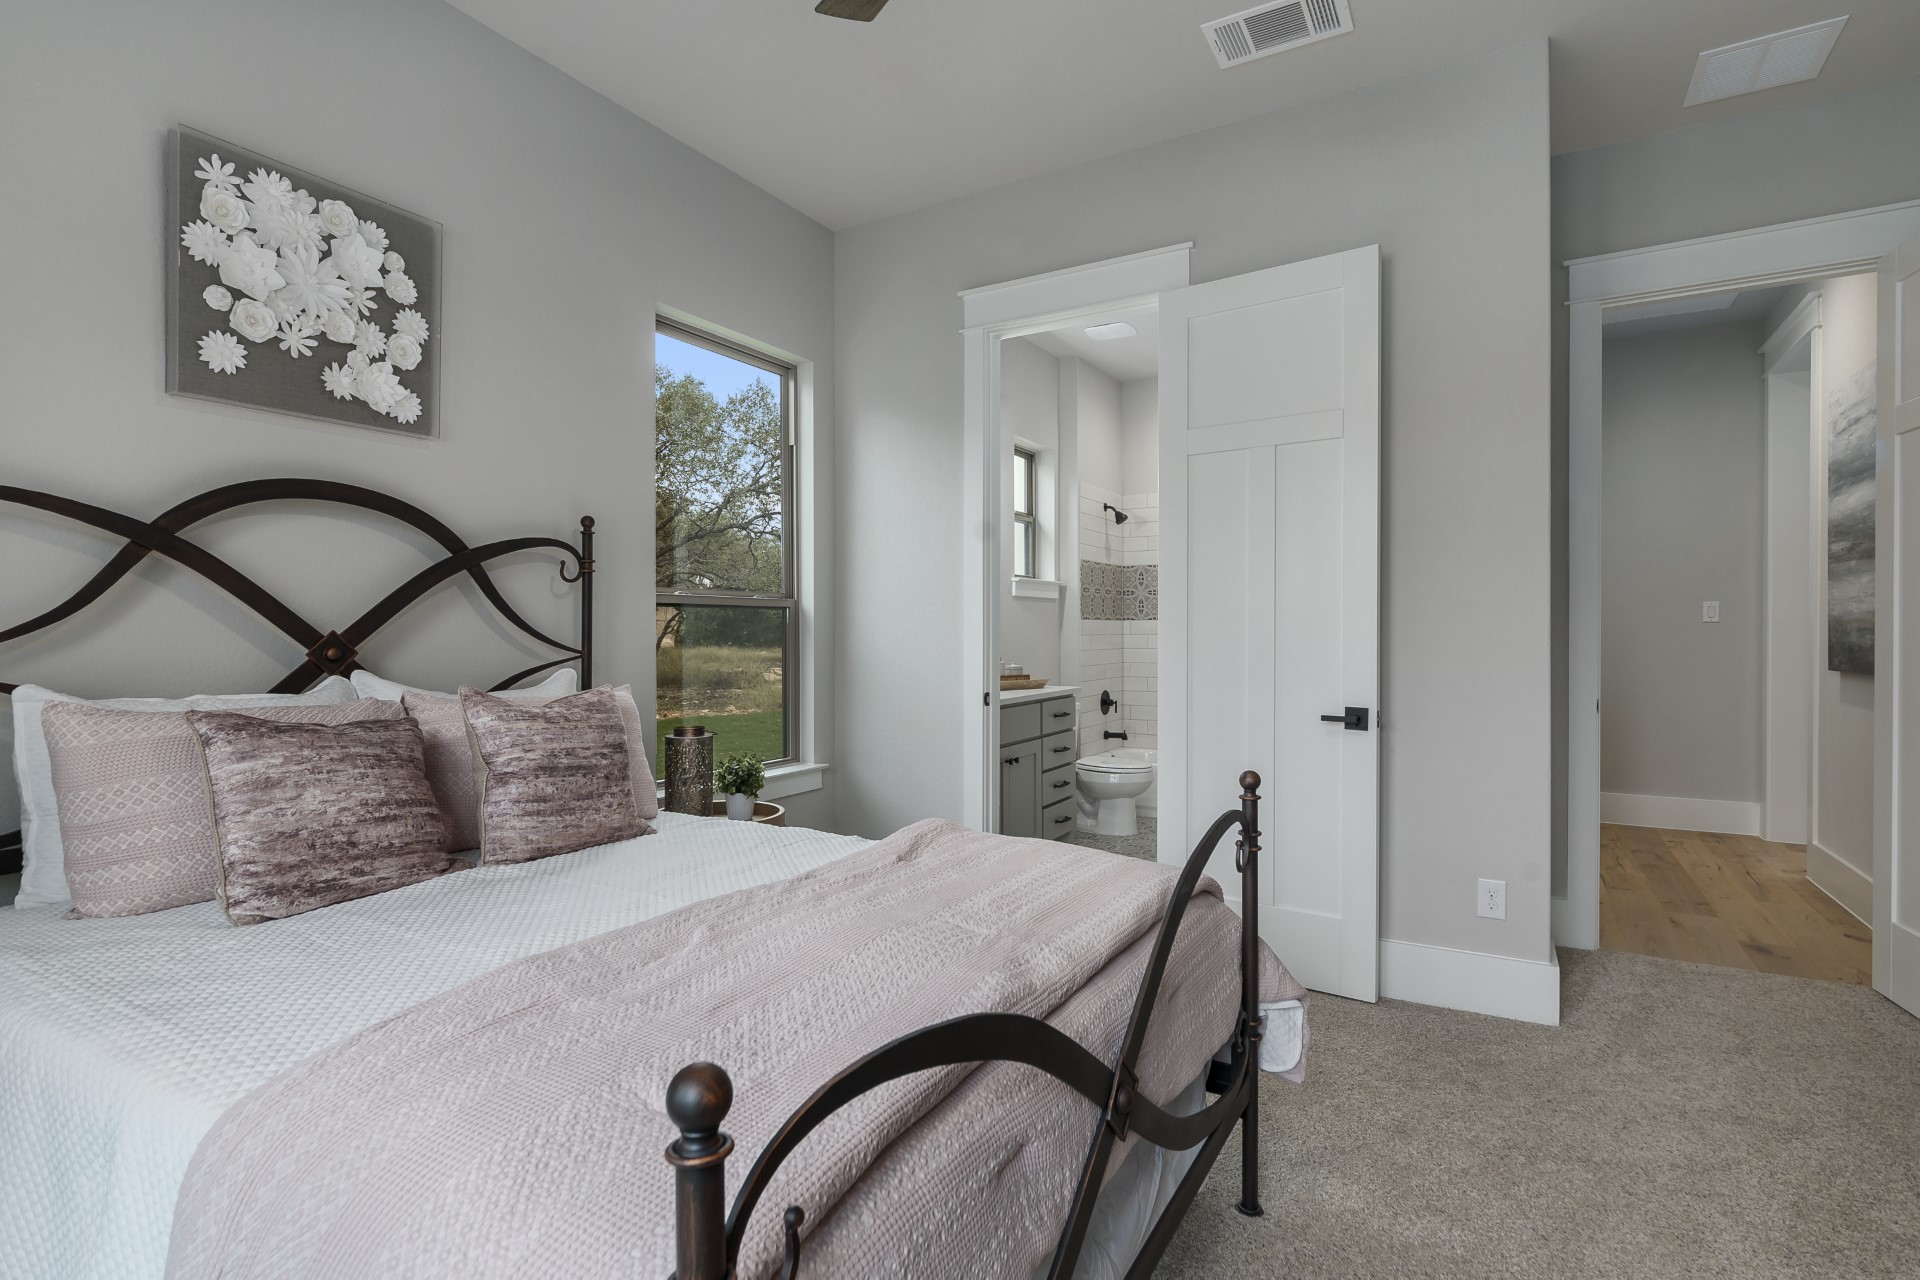 A side view of the Belle Oaks bedroom suite with bathroom within the Belle Oaks custom floor plan from JLP Builders